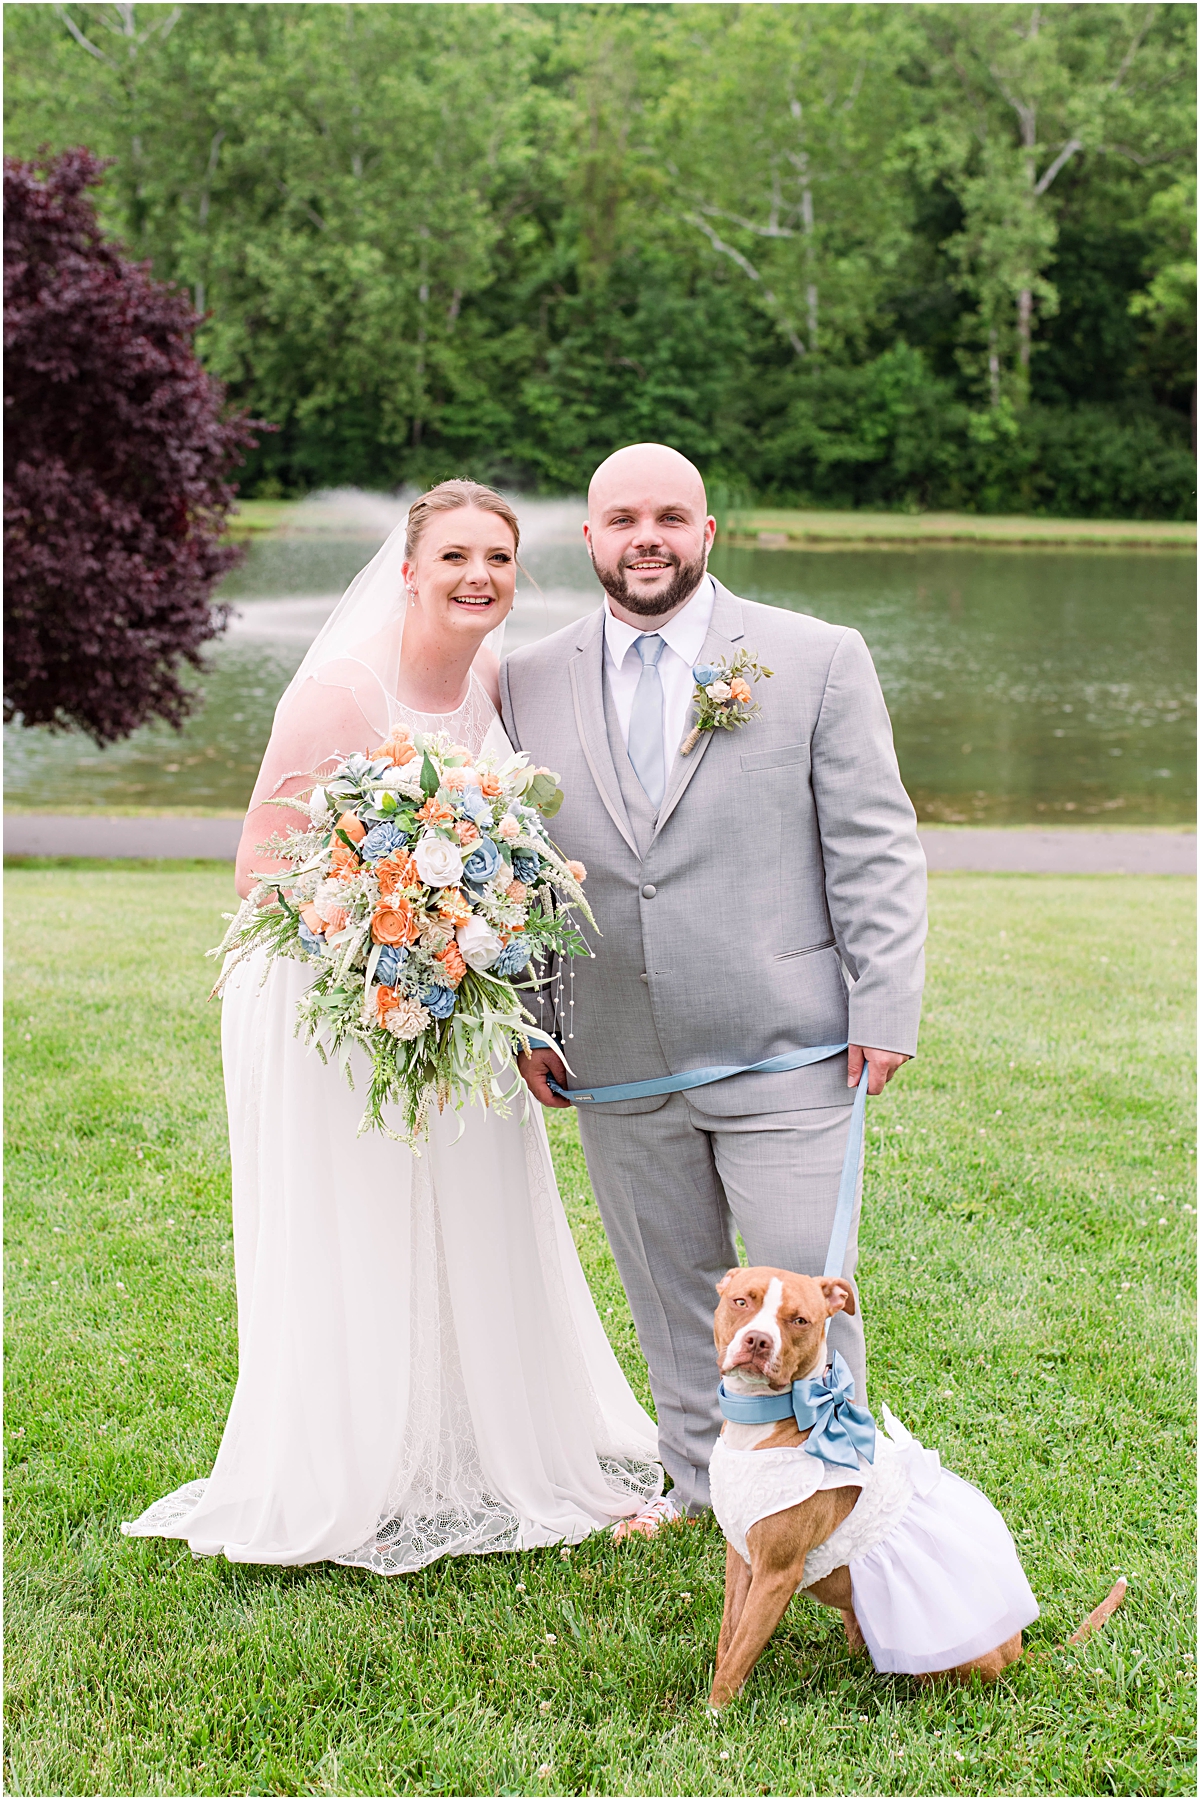 Anneliese and Alec smiling with their dog in front of a pond on their wedding day.